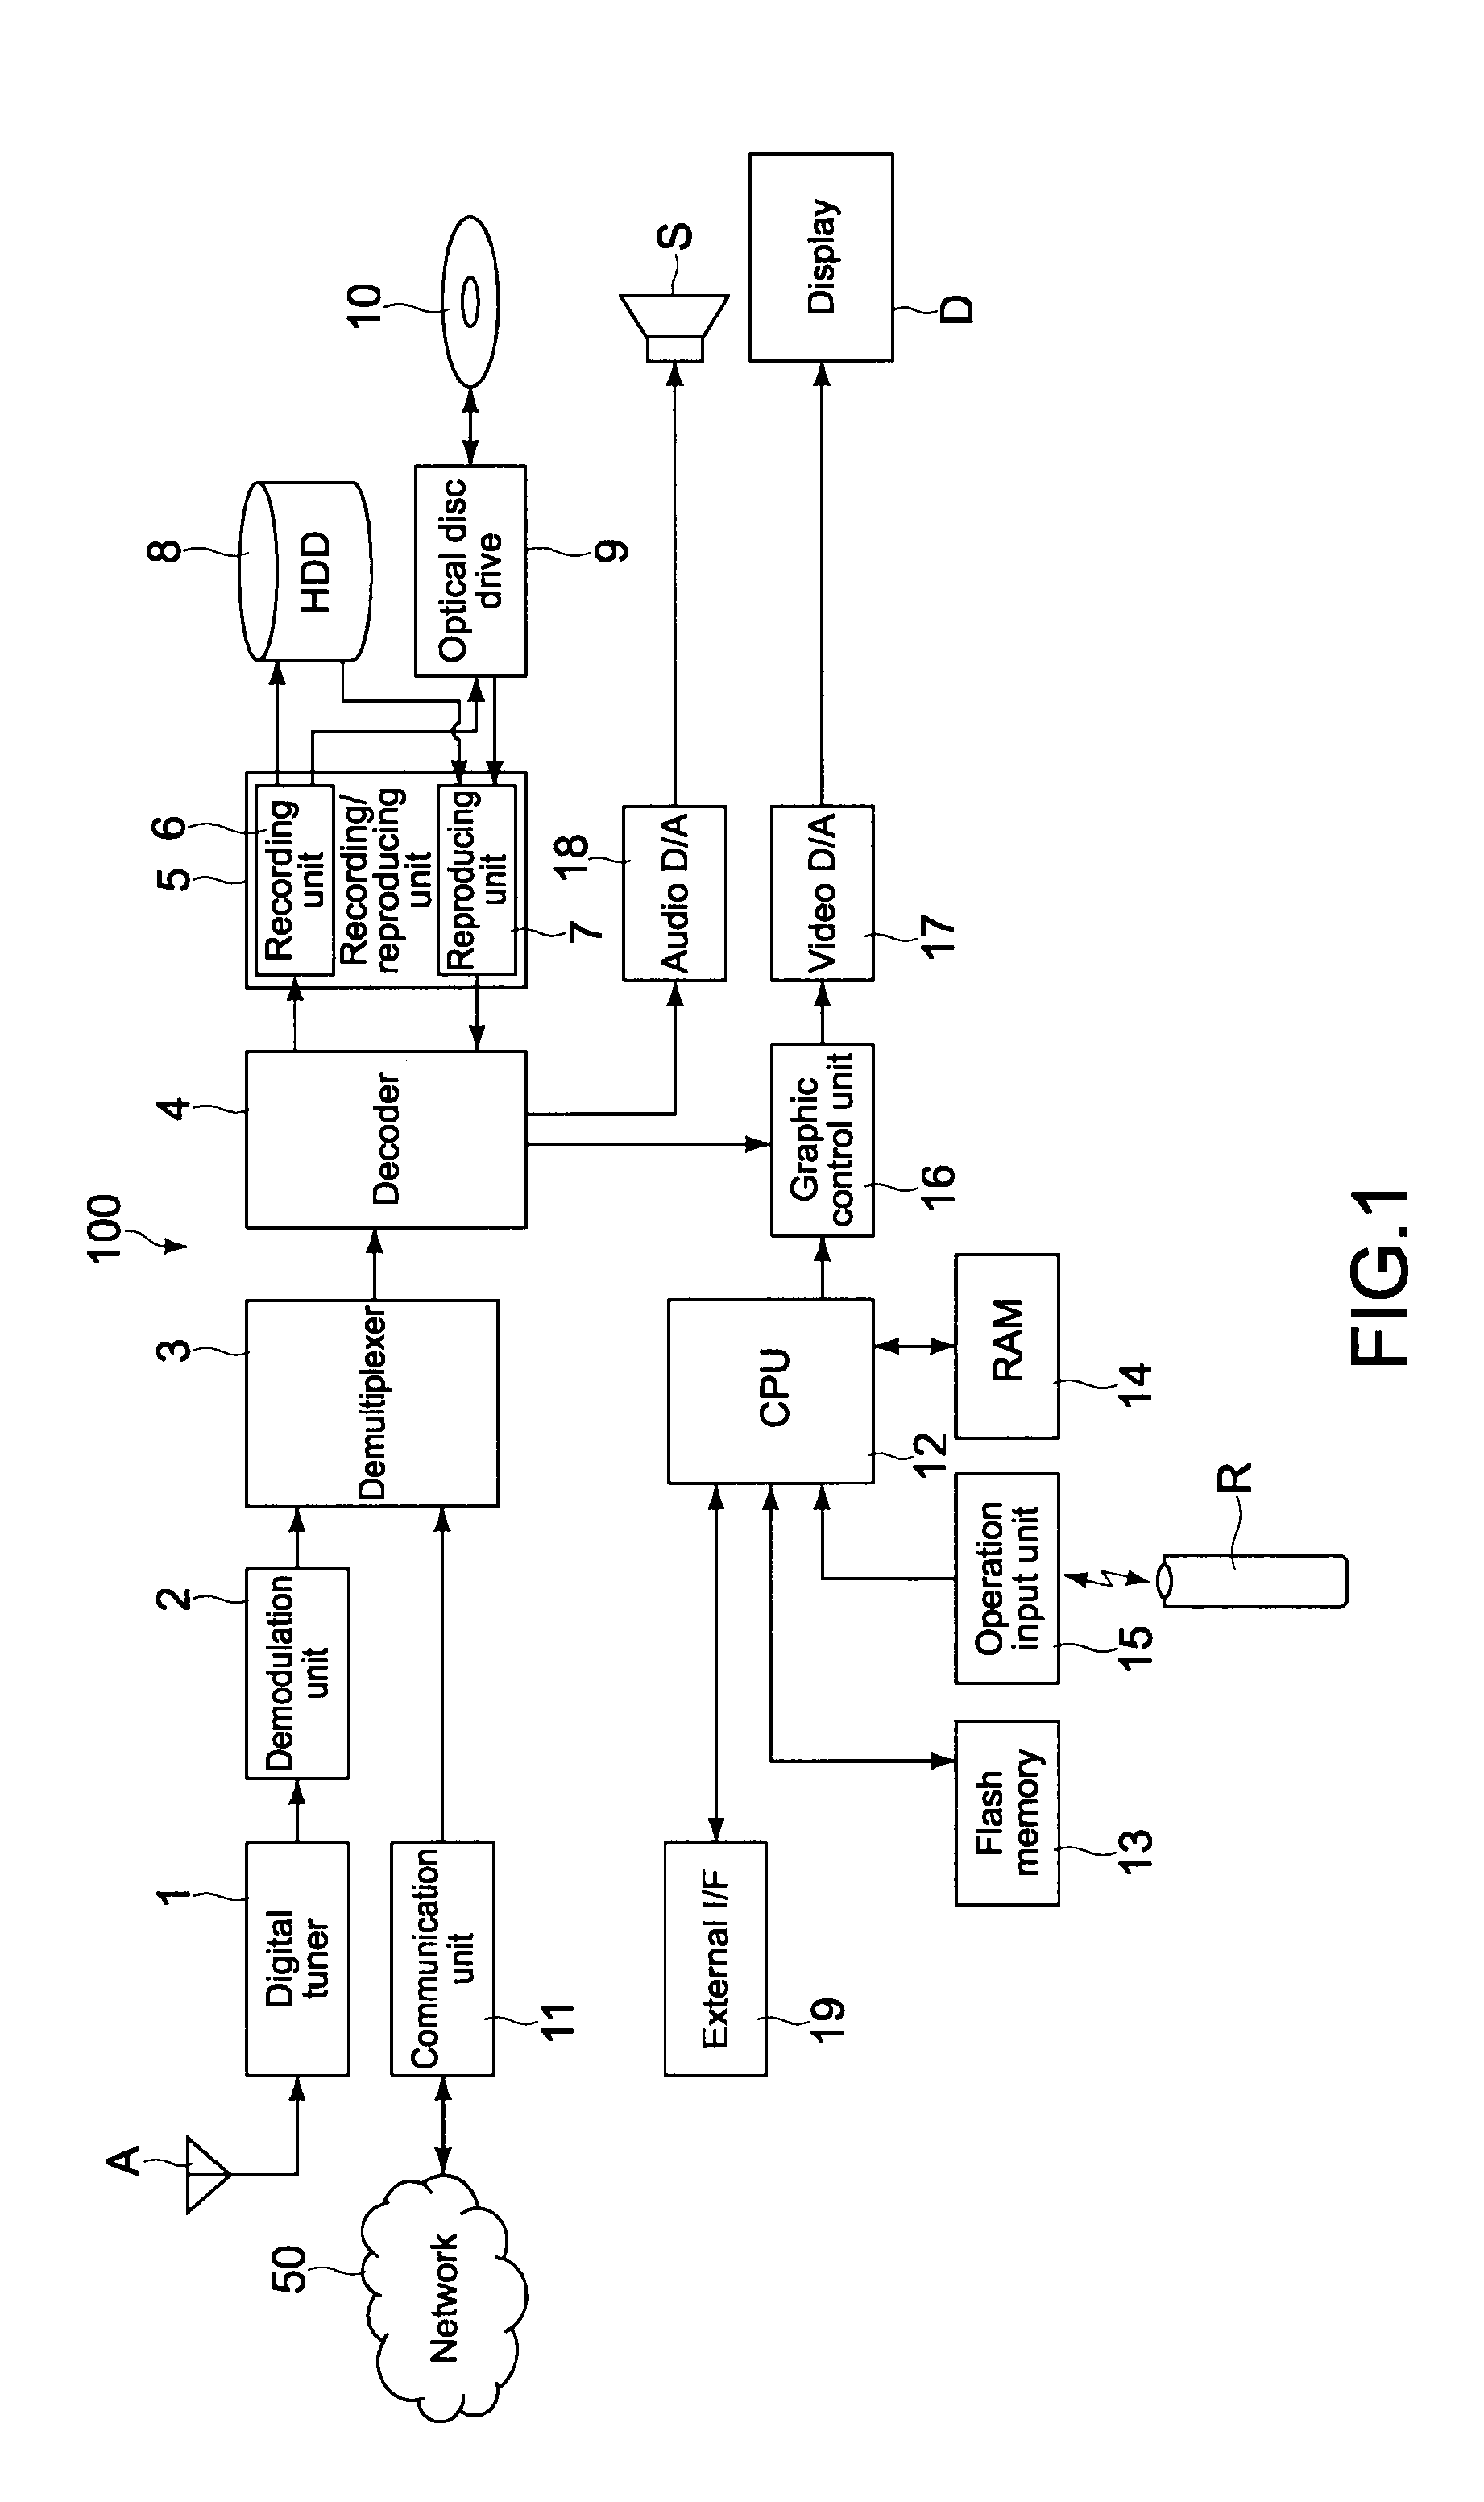 Electronic apparatus, content recommendation method, and program therefor